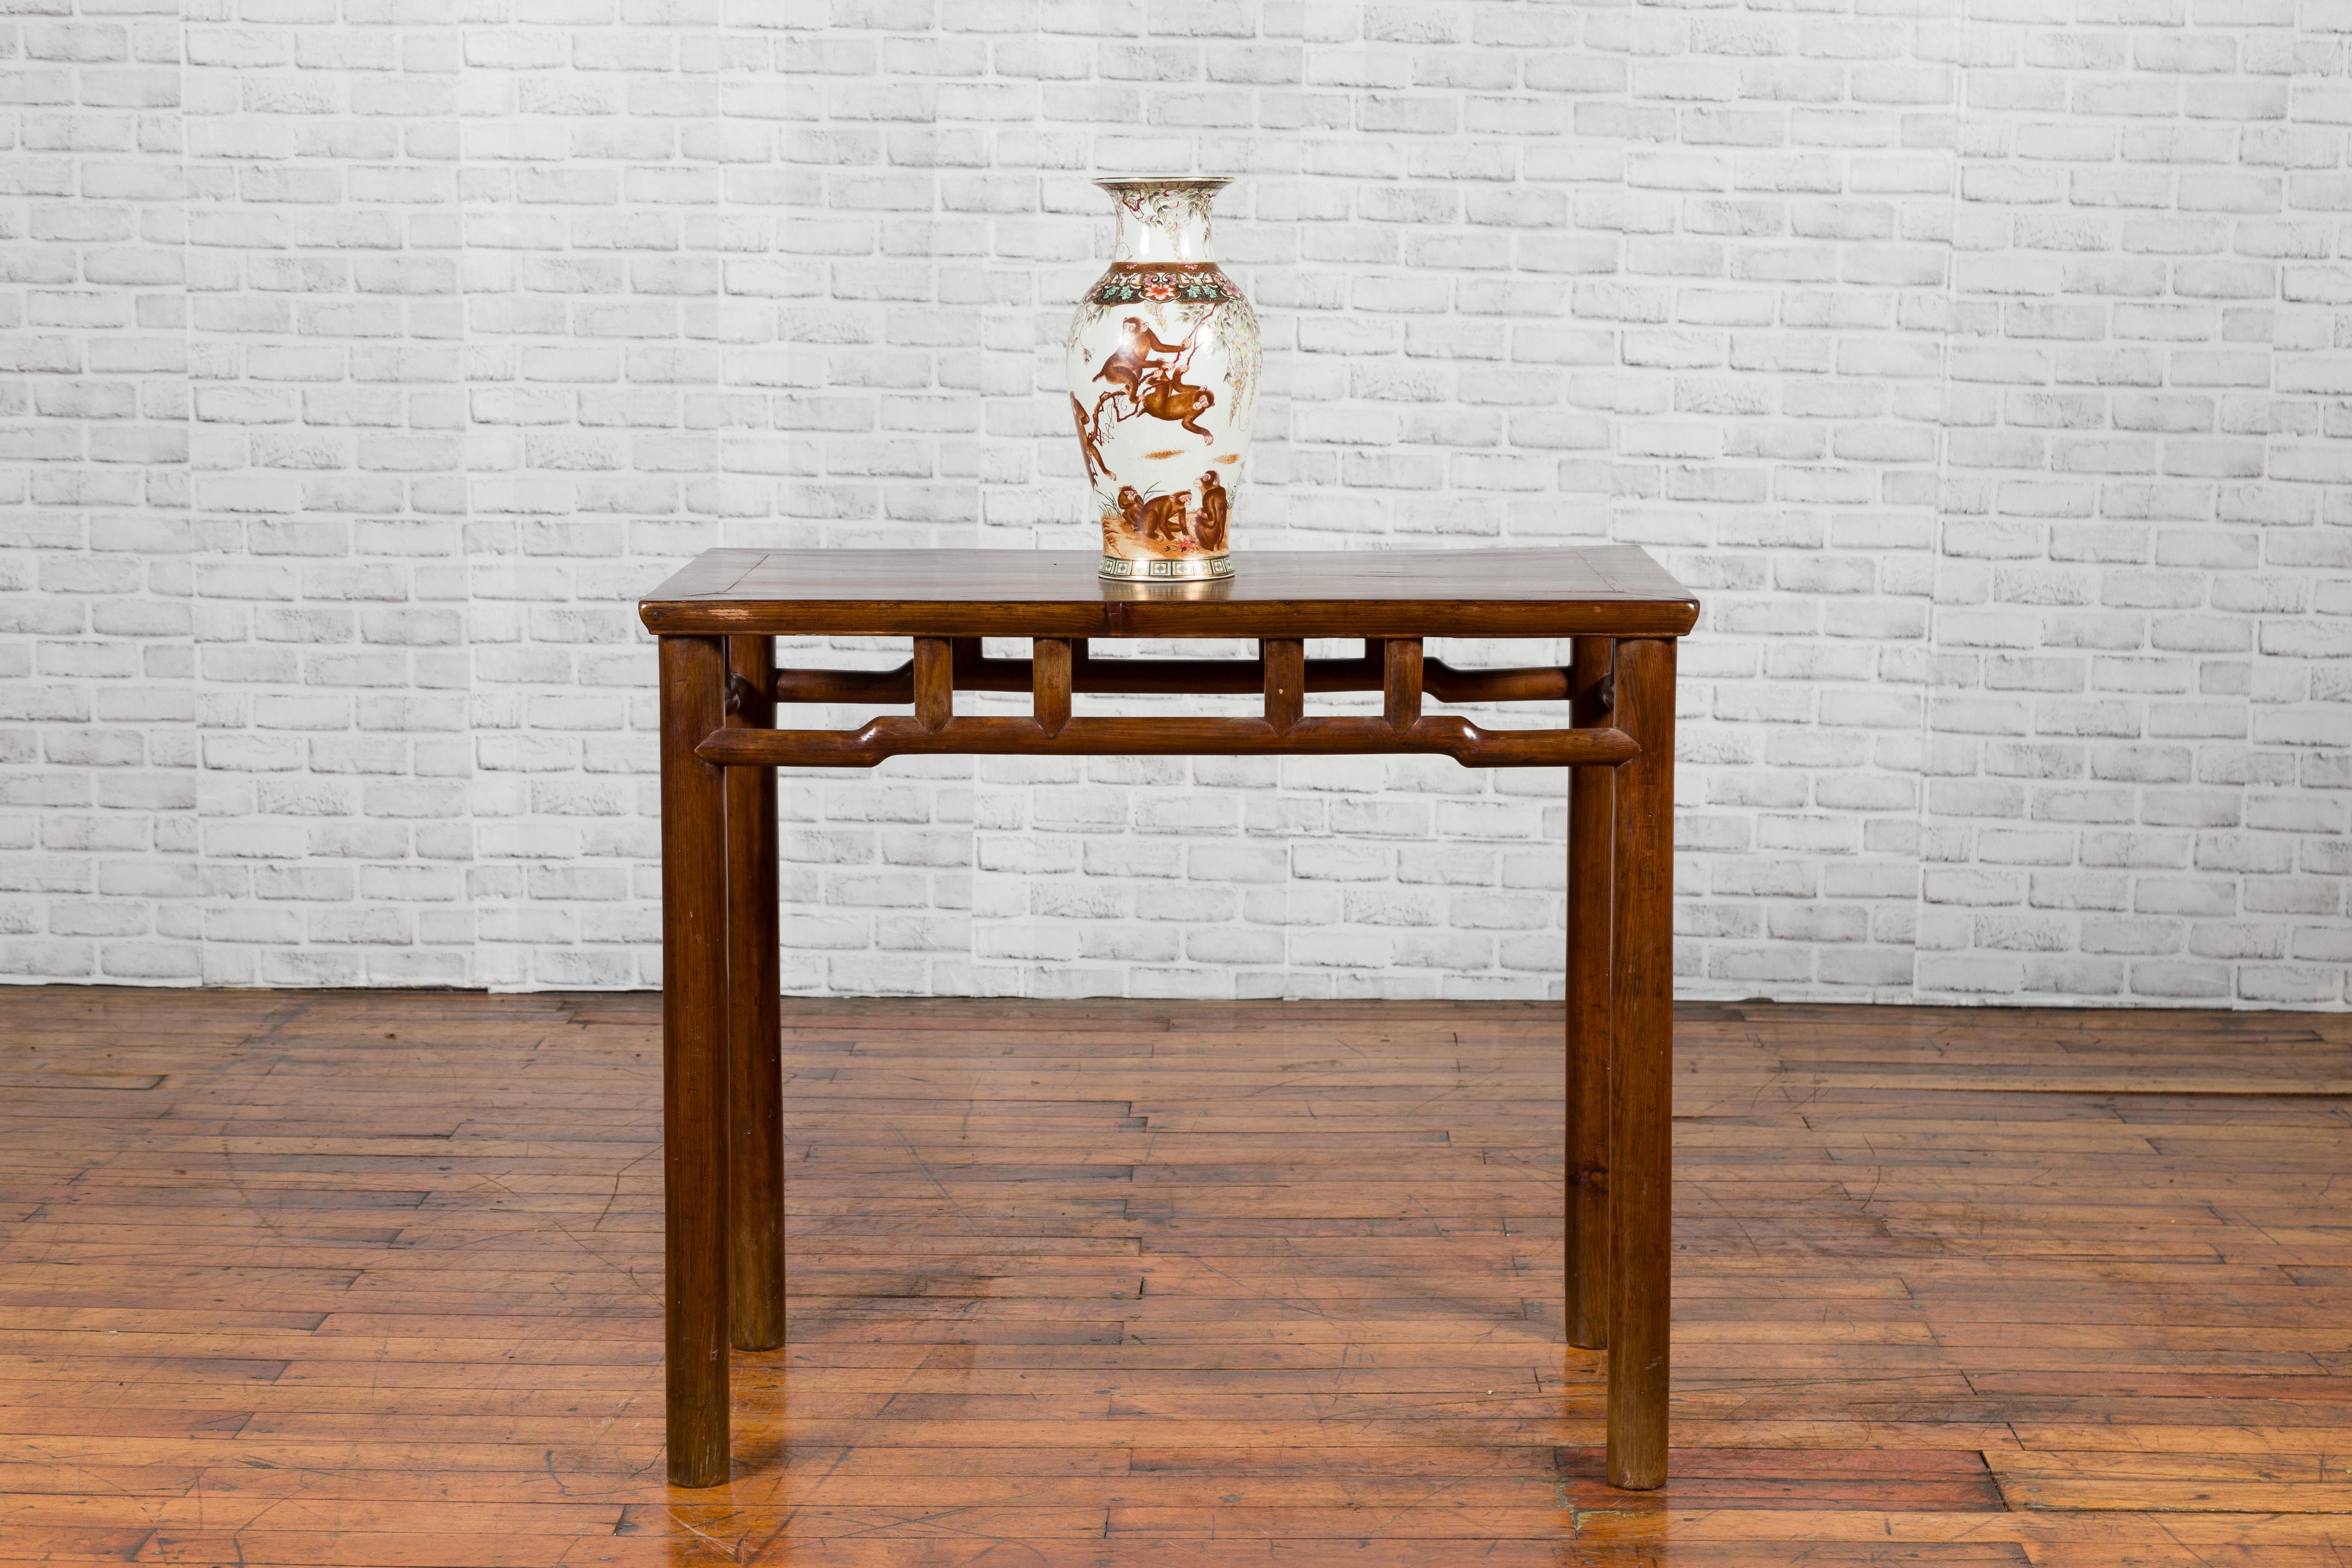 A Chinese Qing dynasty period elm console table from the 19th century, with pillar strut motifs and humpbacked apron. Created in China during the Qing dynasty, this Chinese console table features a rectangular top with central board, sitting above a